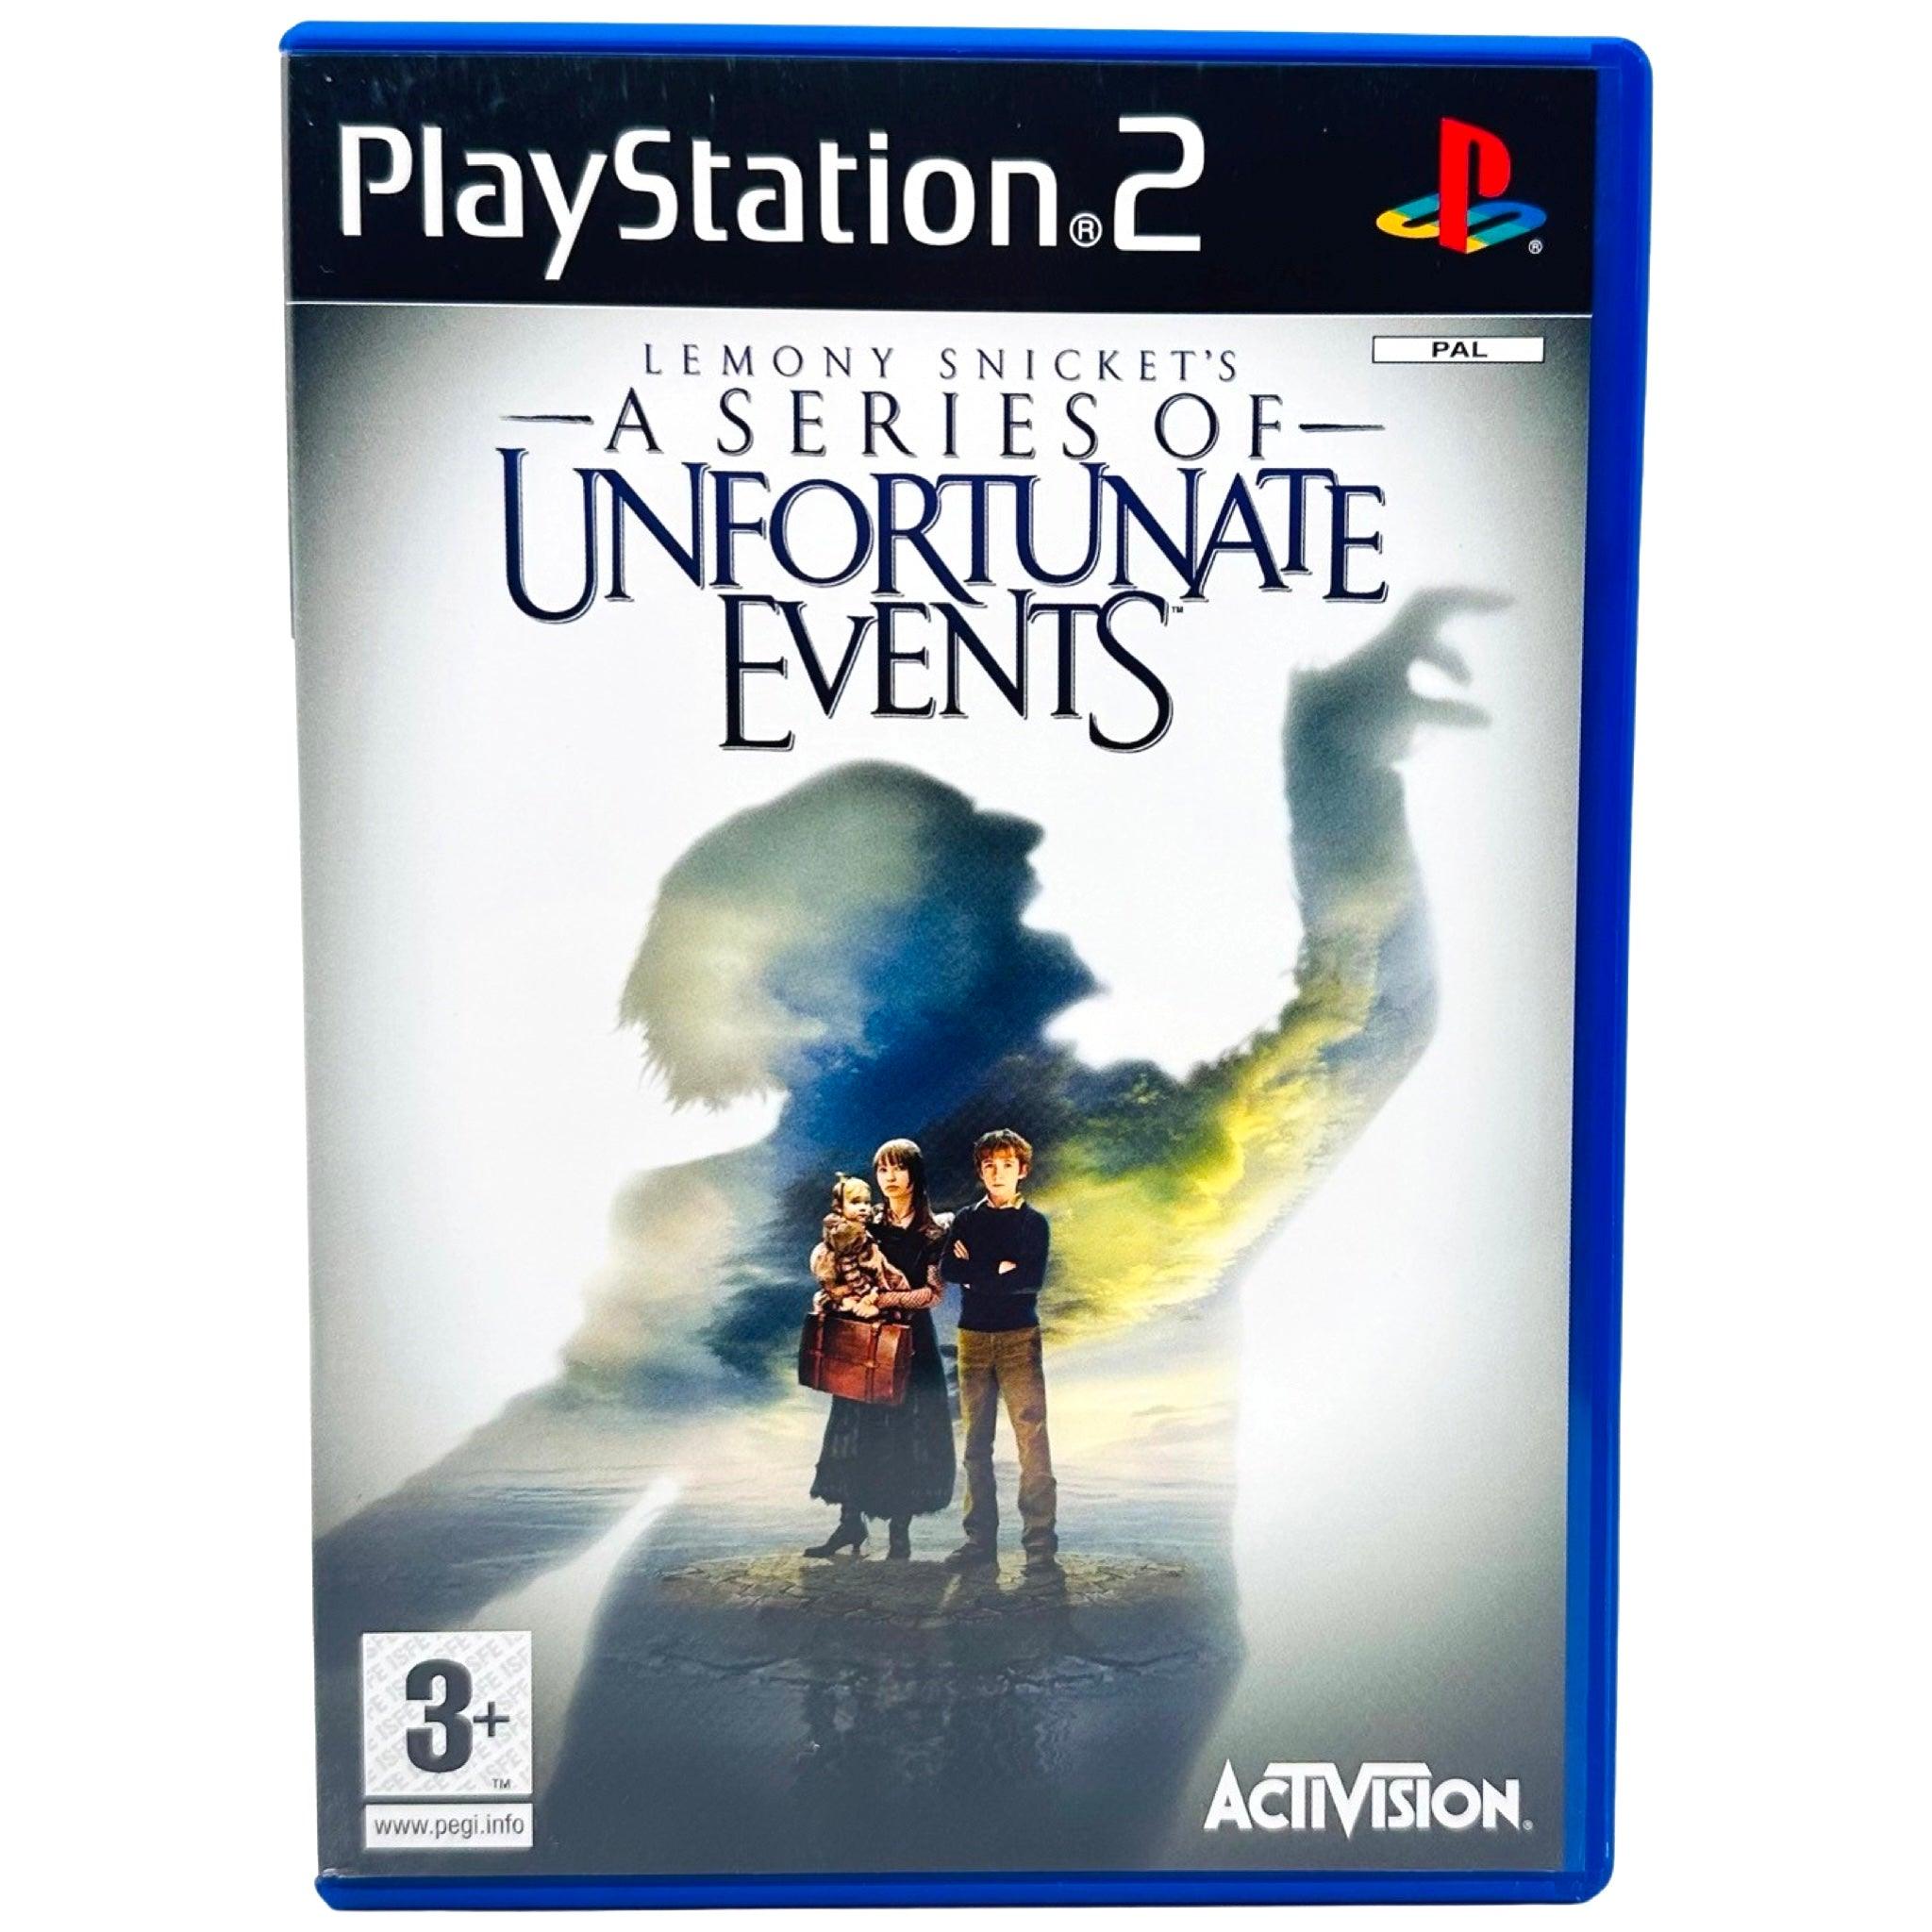 PS2: Lemony Snicket's A Series Of Unfortunate Events - RetroGaming.no